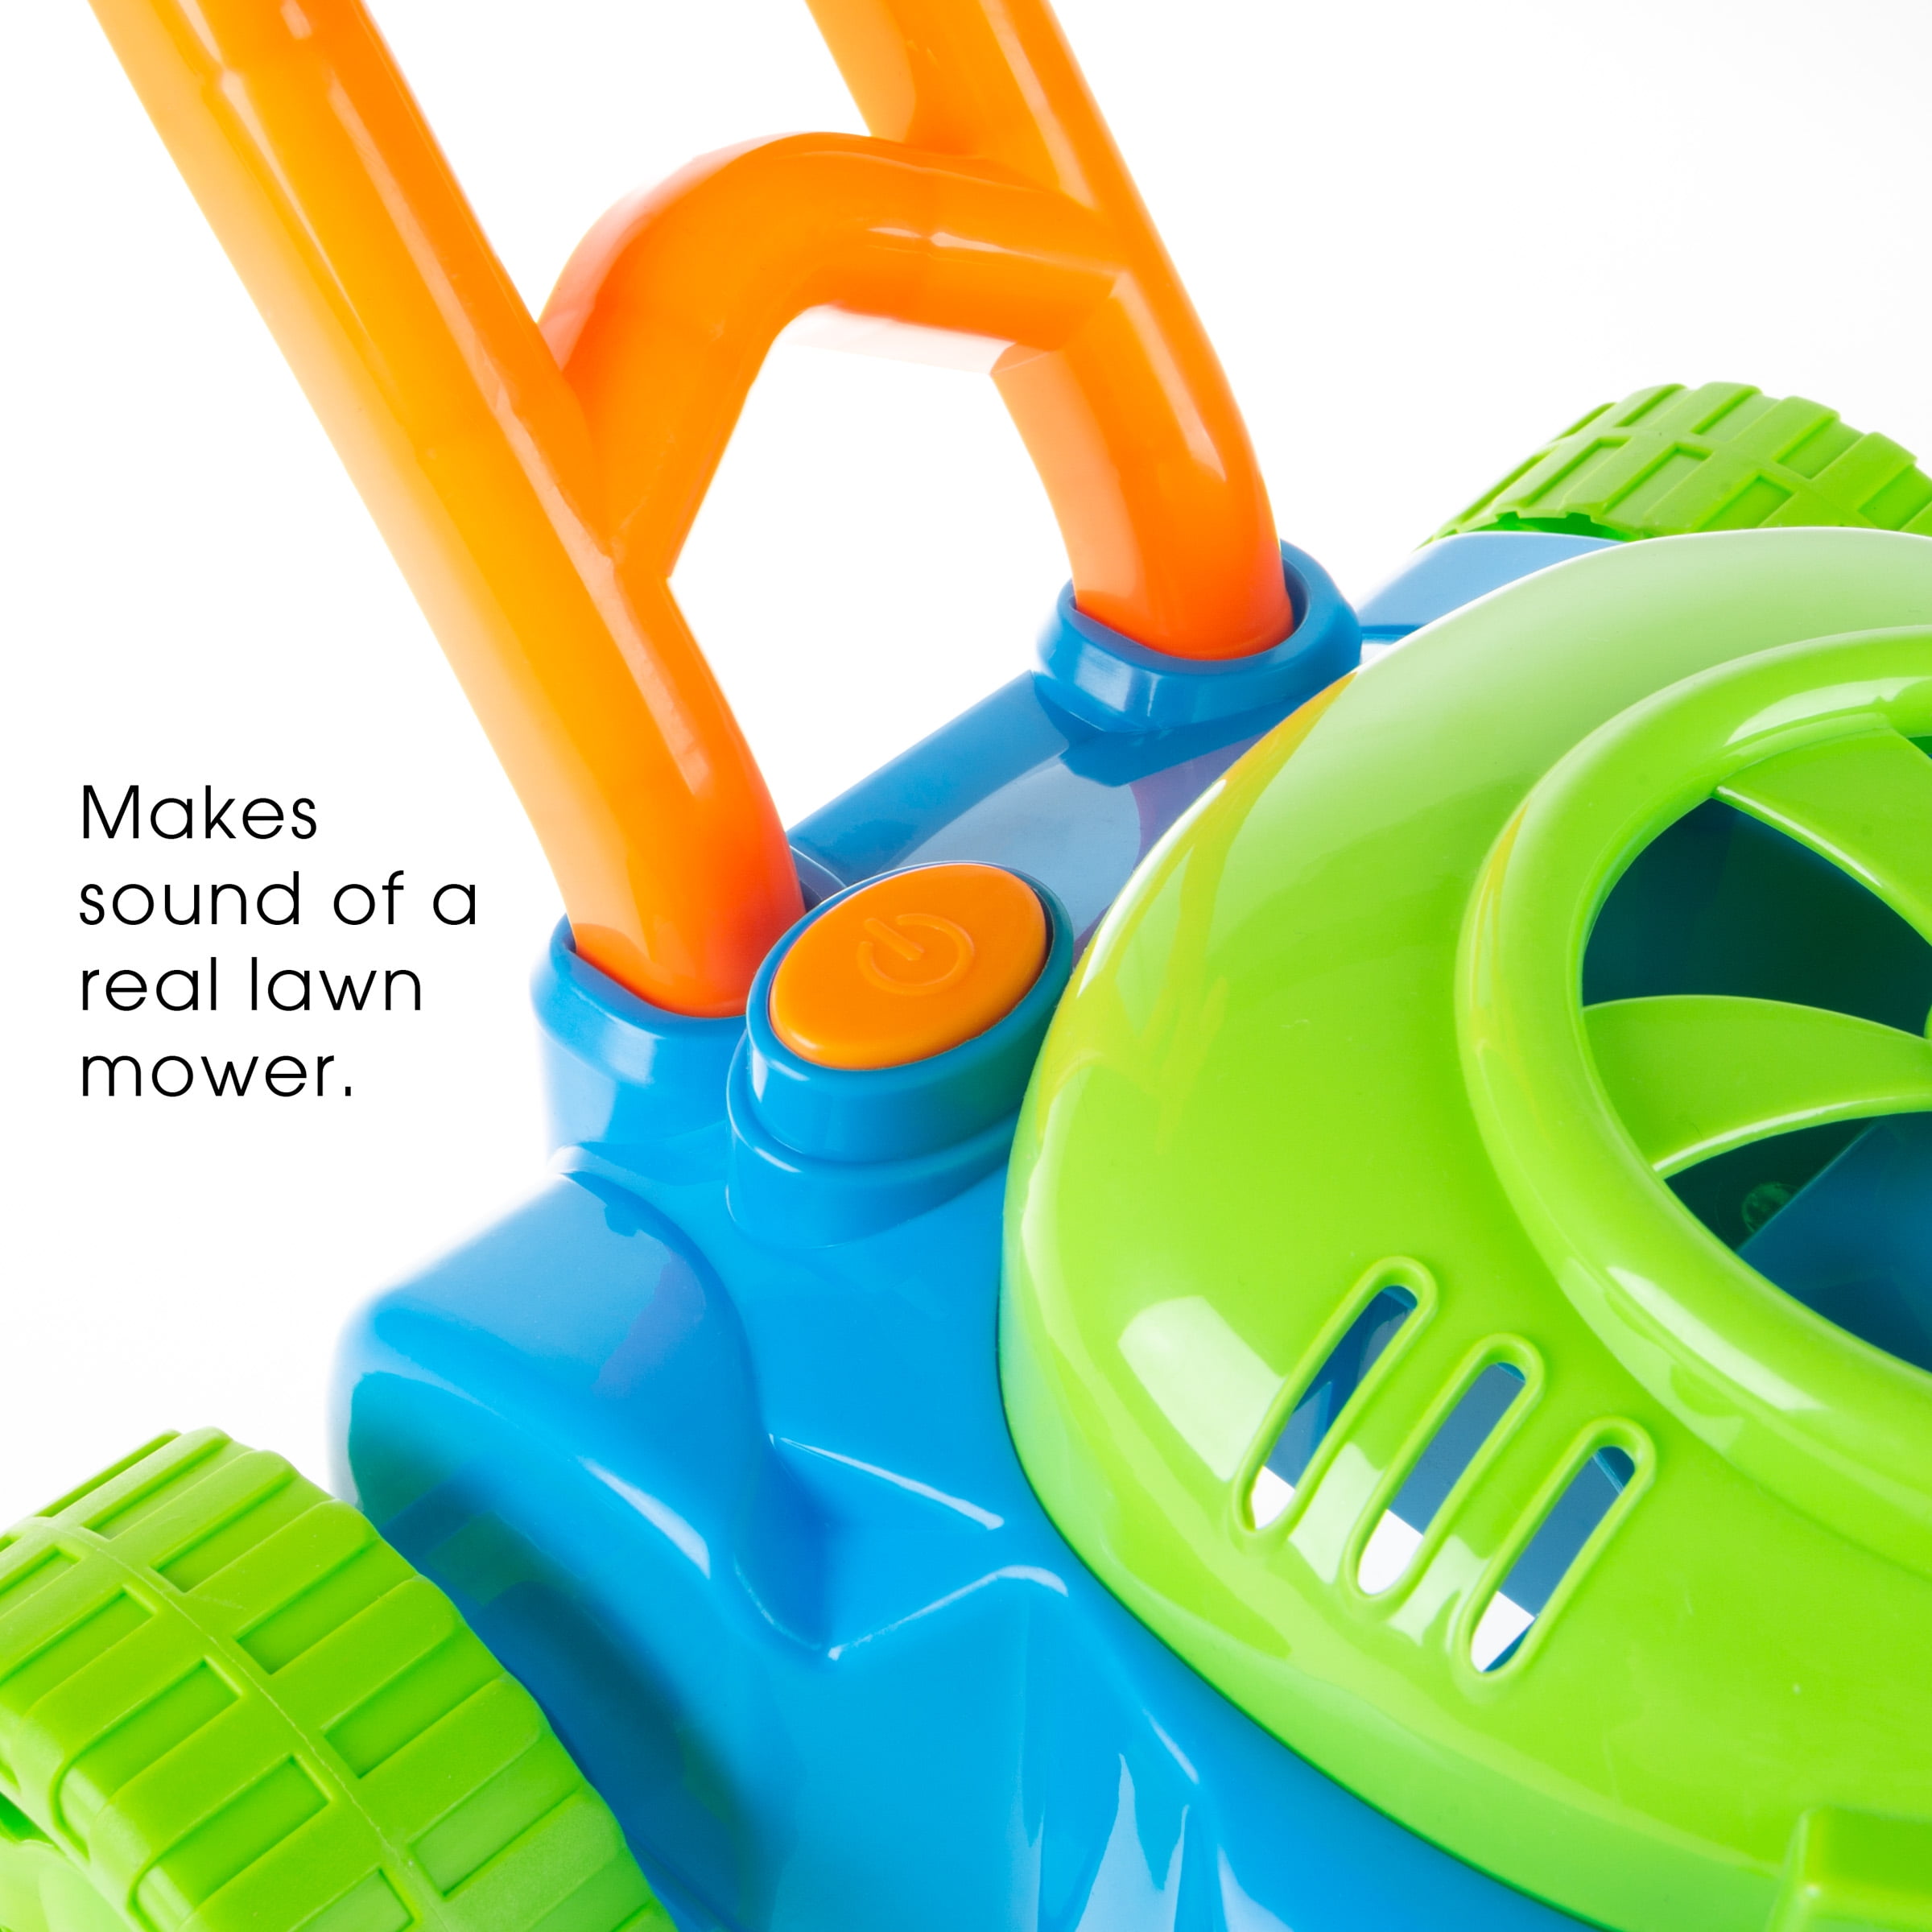 Toy Time Bubble Mower Toy - Realistic Sounds, Push Toy for Kids